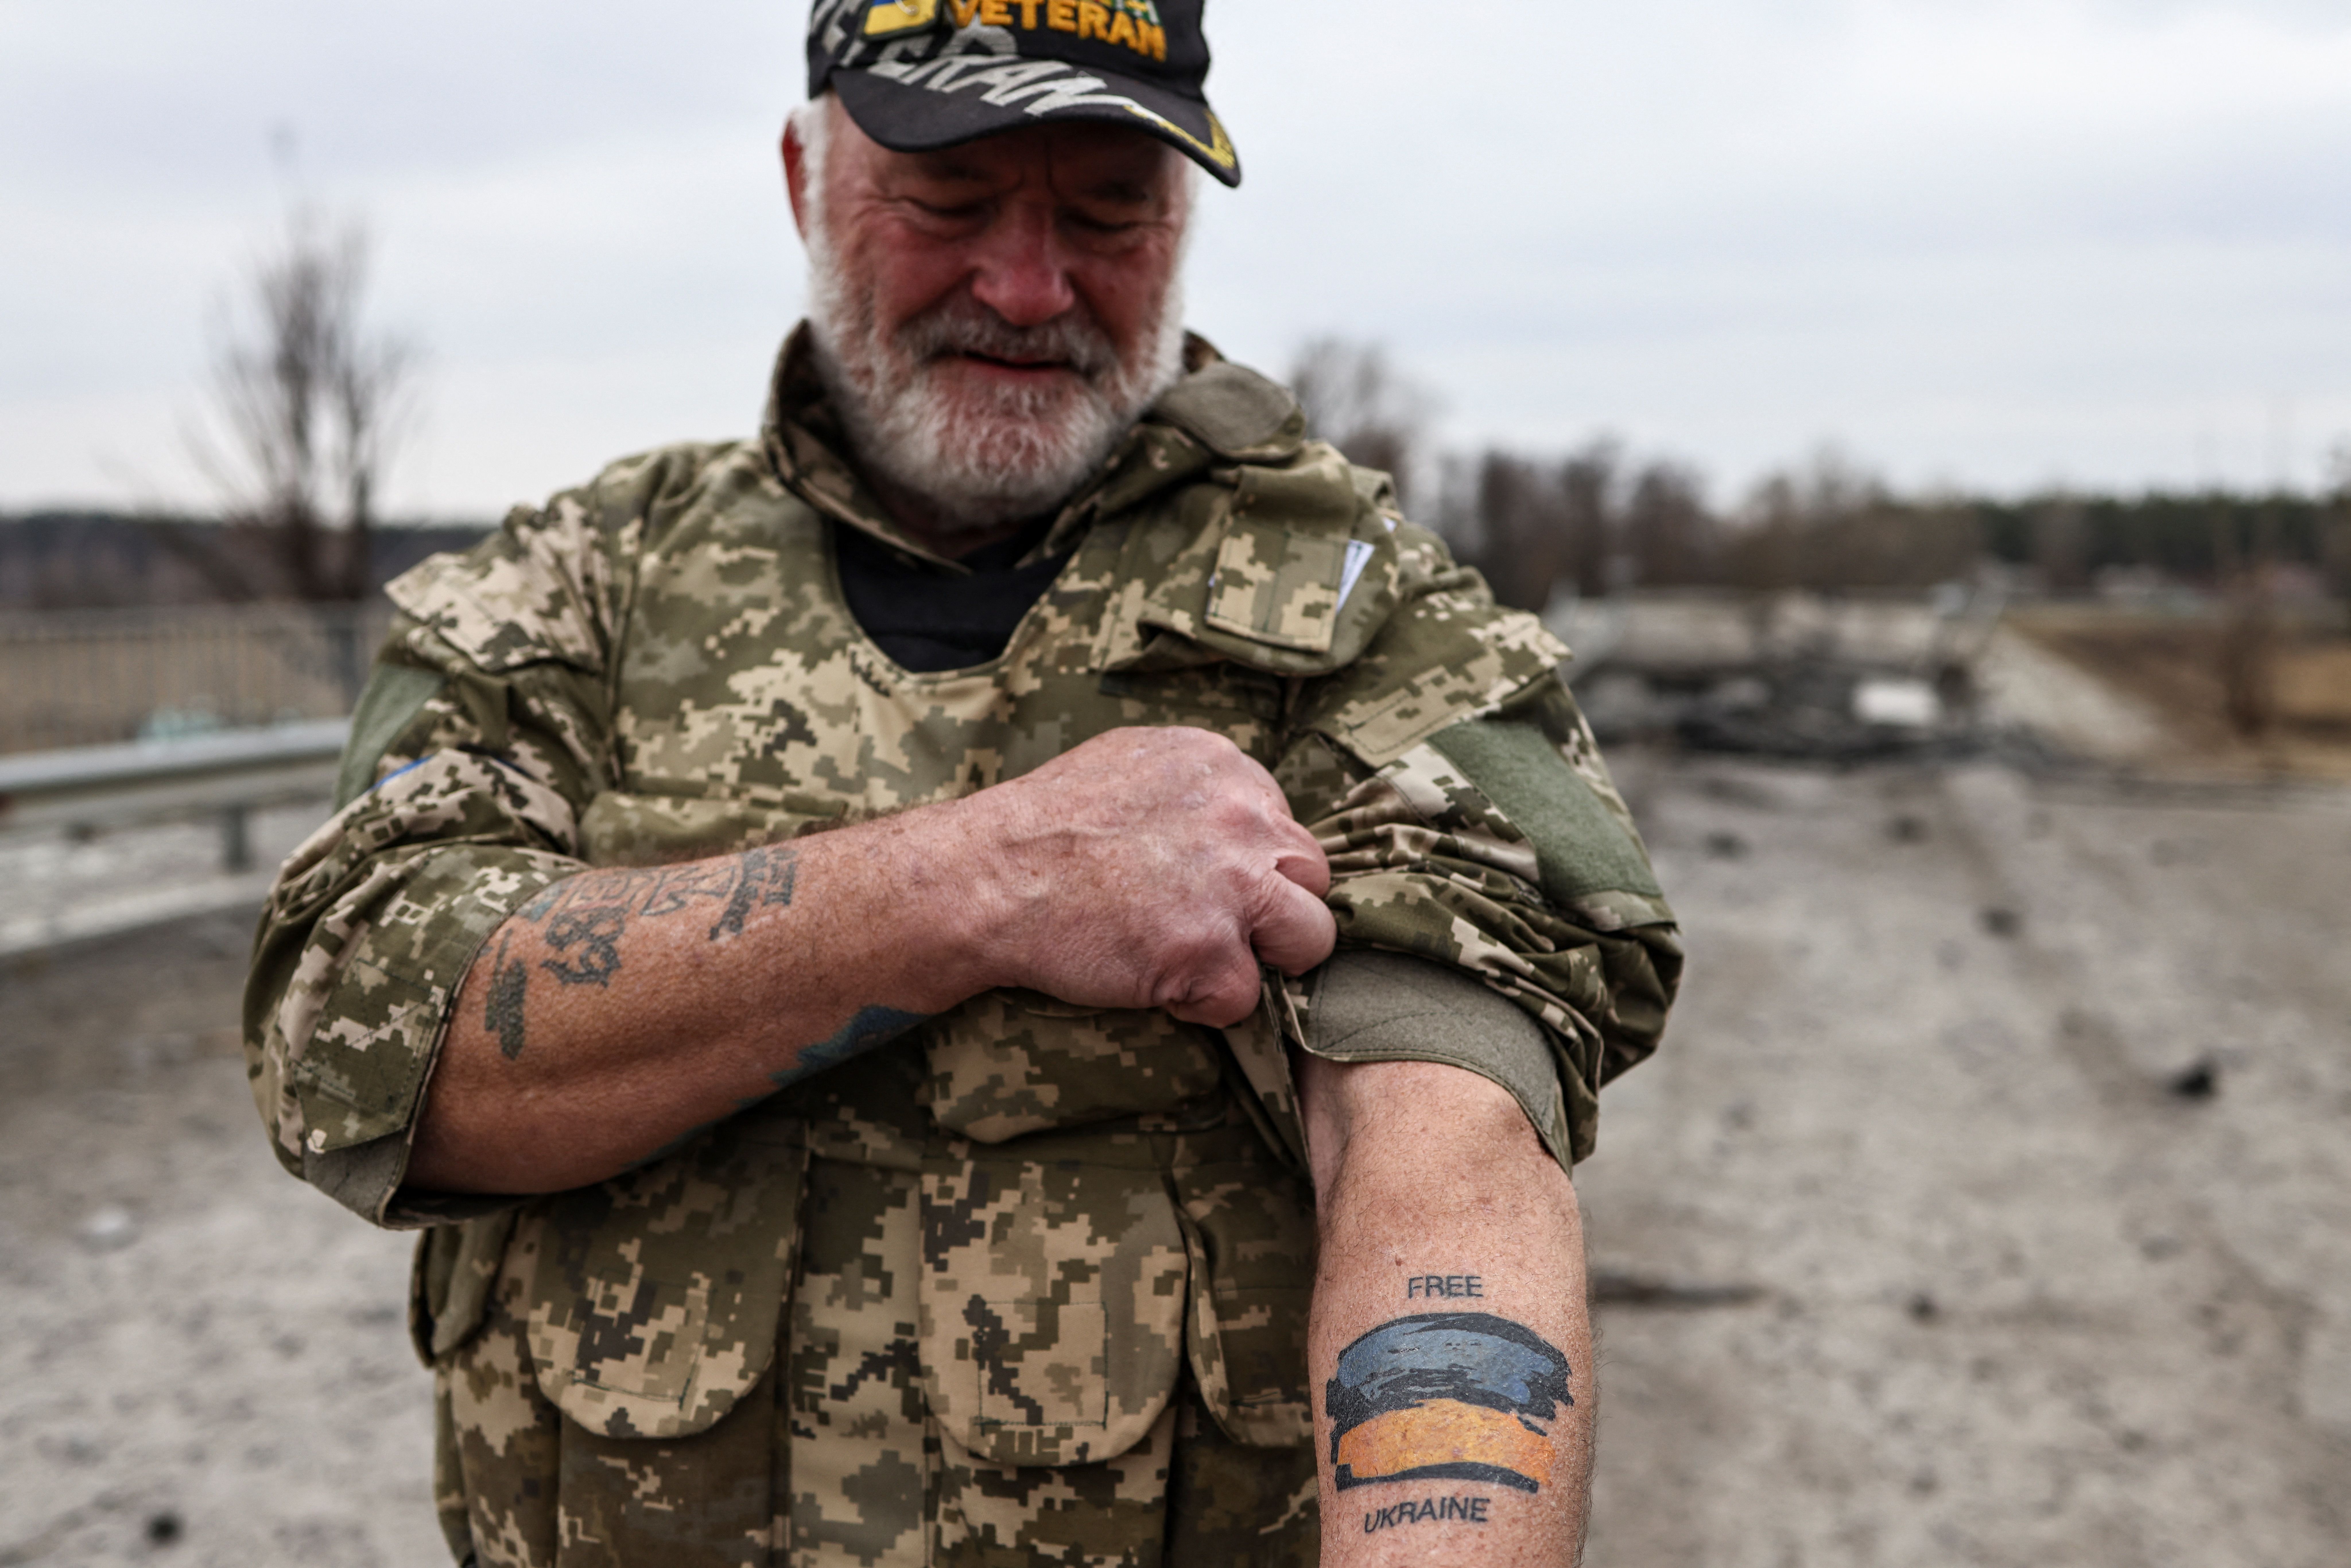 TOPSHOT - US war veteran Steven Straub shows his tattoo with the Ukranian flag as they patrol on a road near Buda-Babynetska, north of Kyiv, on April 5, 2022, days after Russian forces retreated from the area